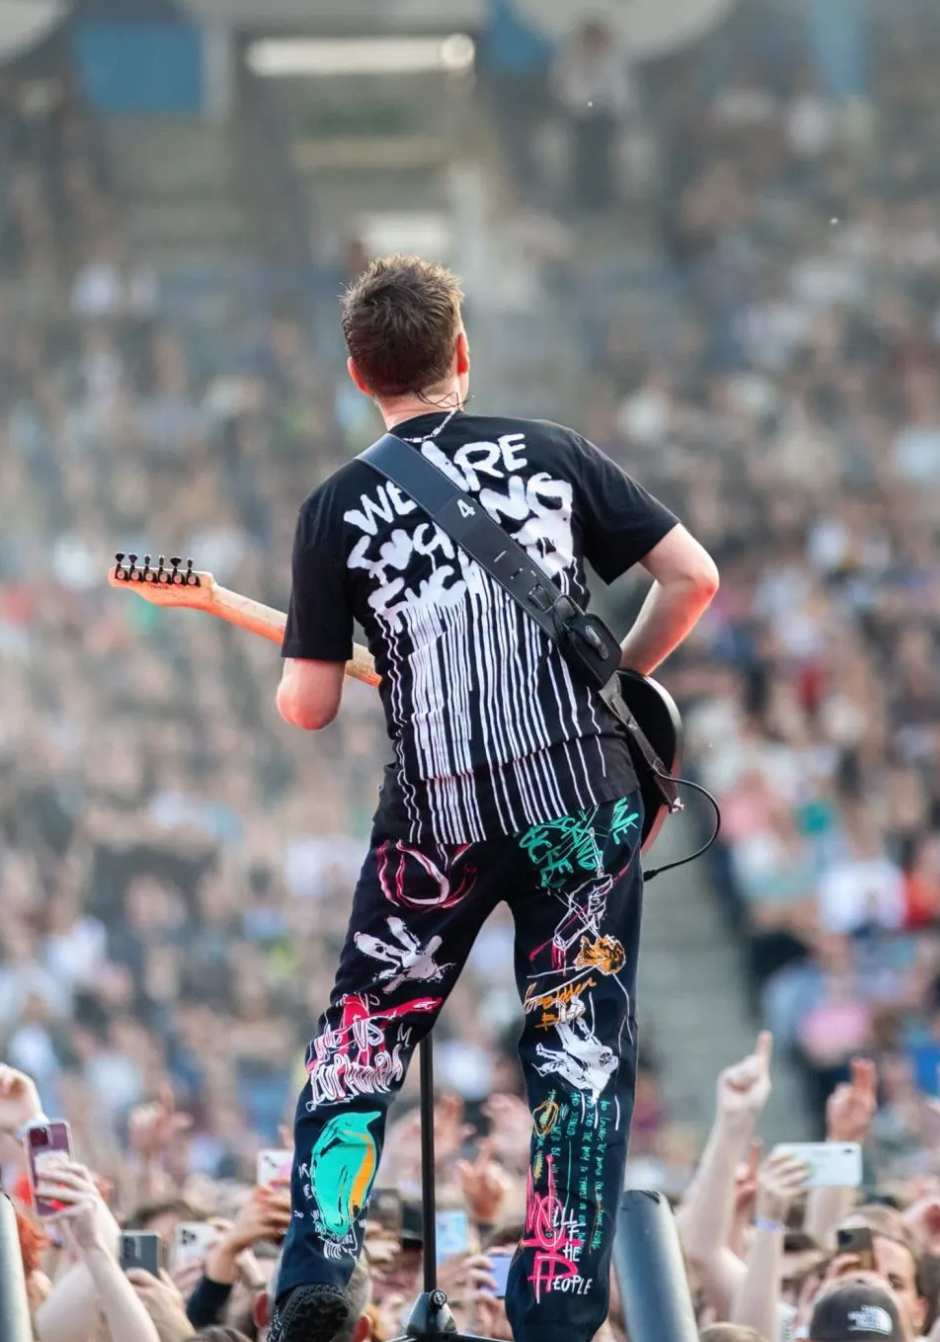 MUSE T-shirt Will Of The People Matthew Bellamy WAFF Live Concert